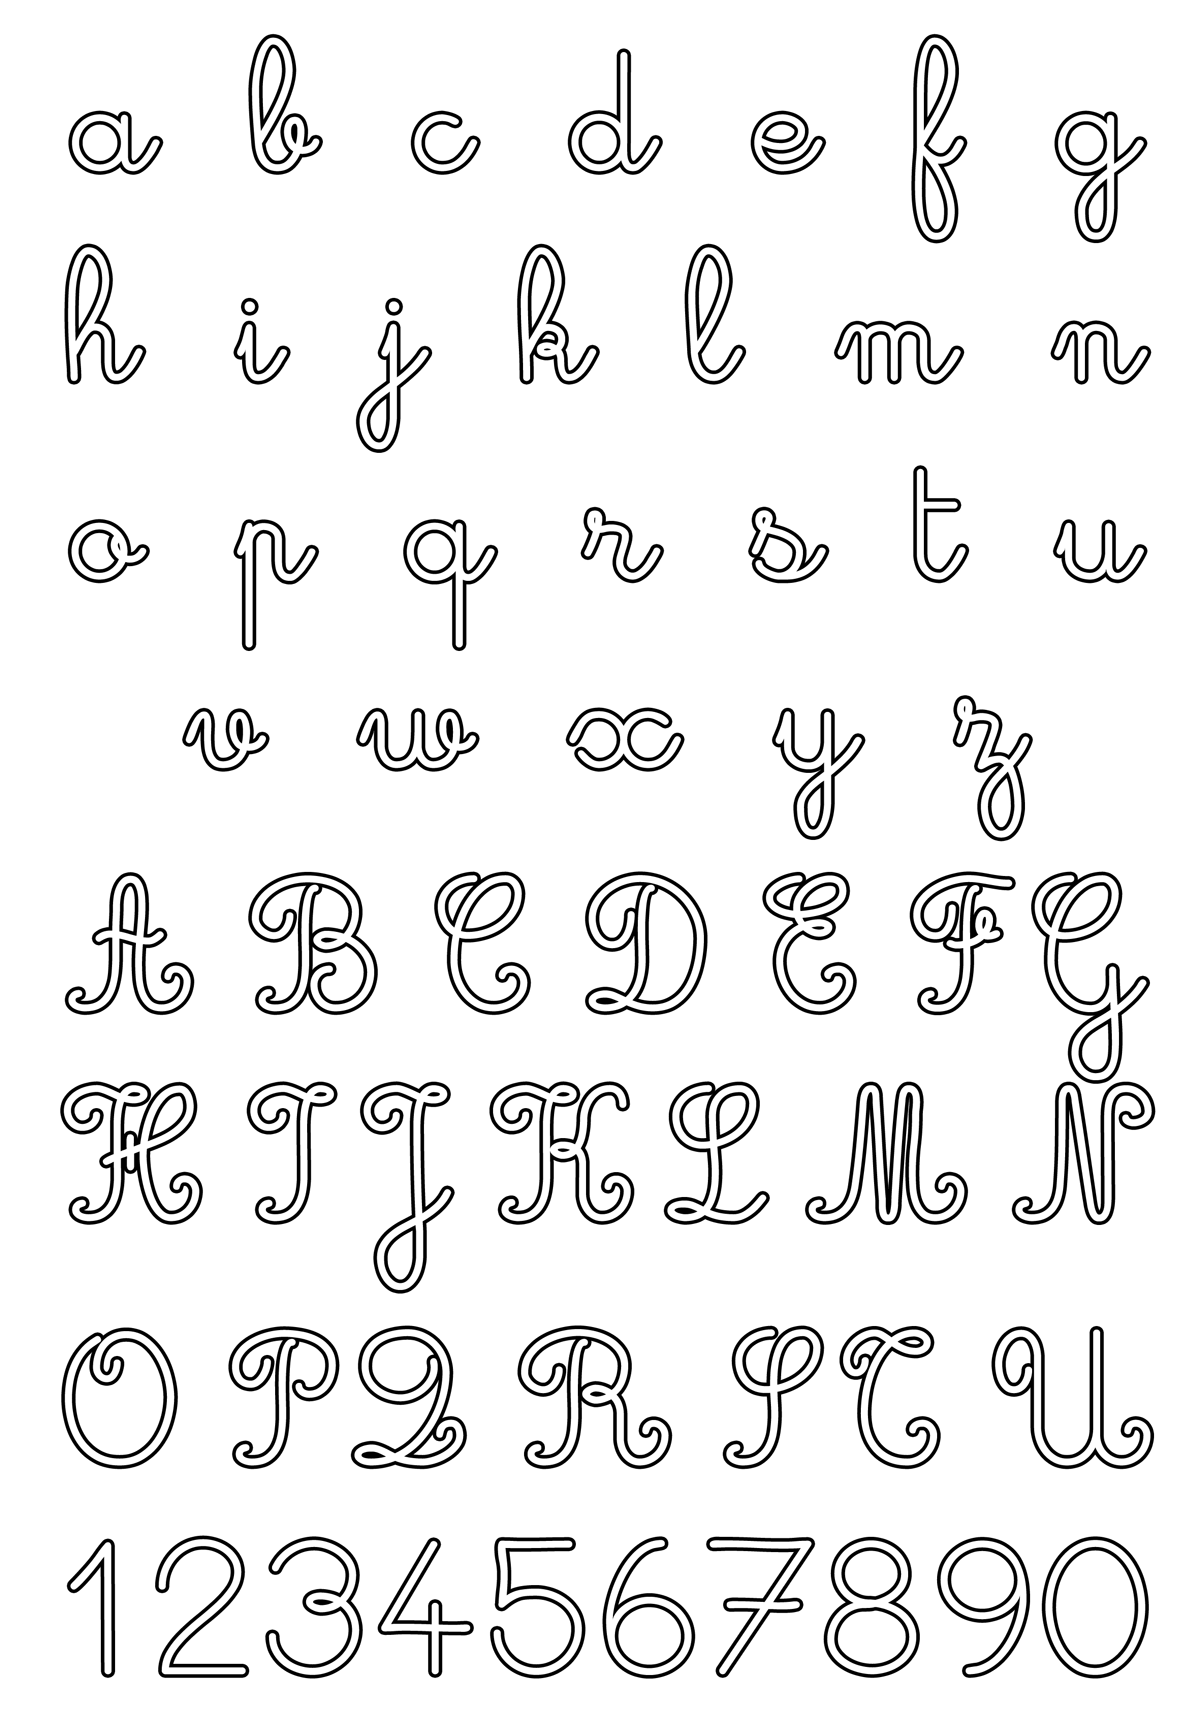 Letters and numbers - Letters and numbers, uppercase and lowercase cursive